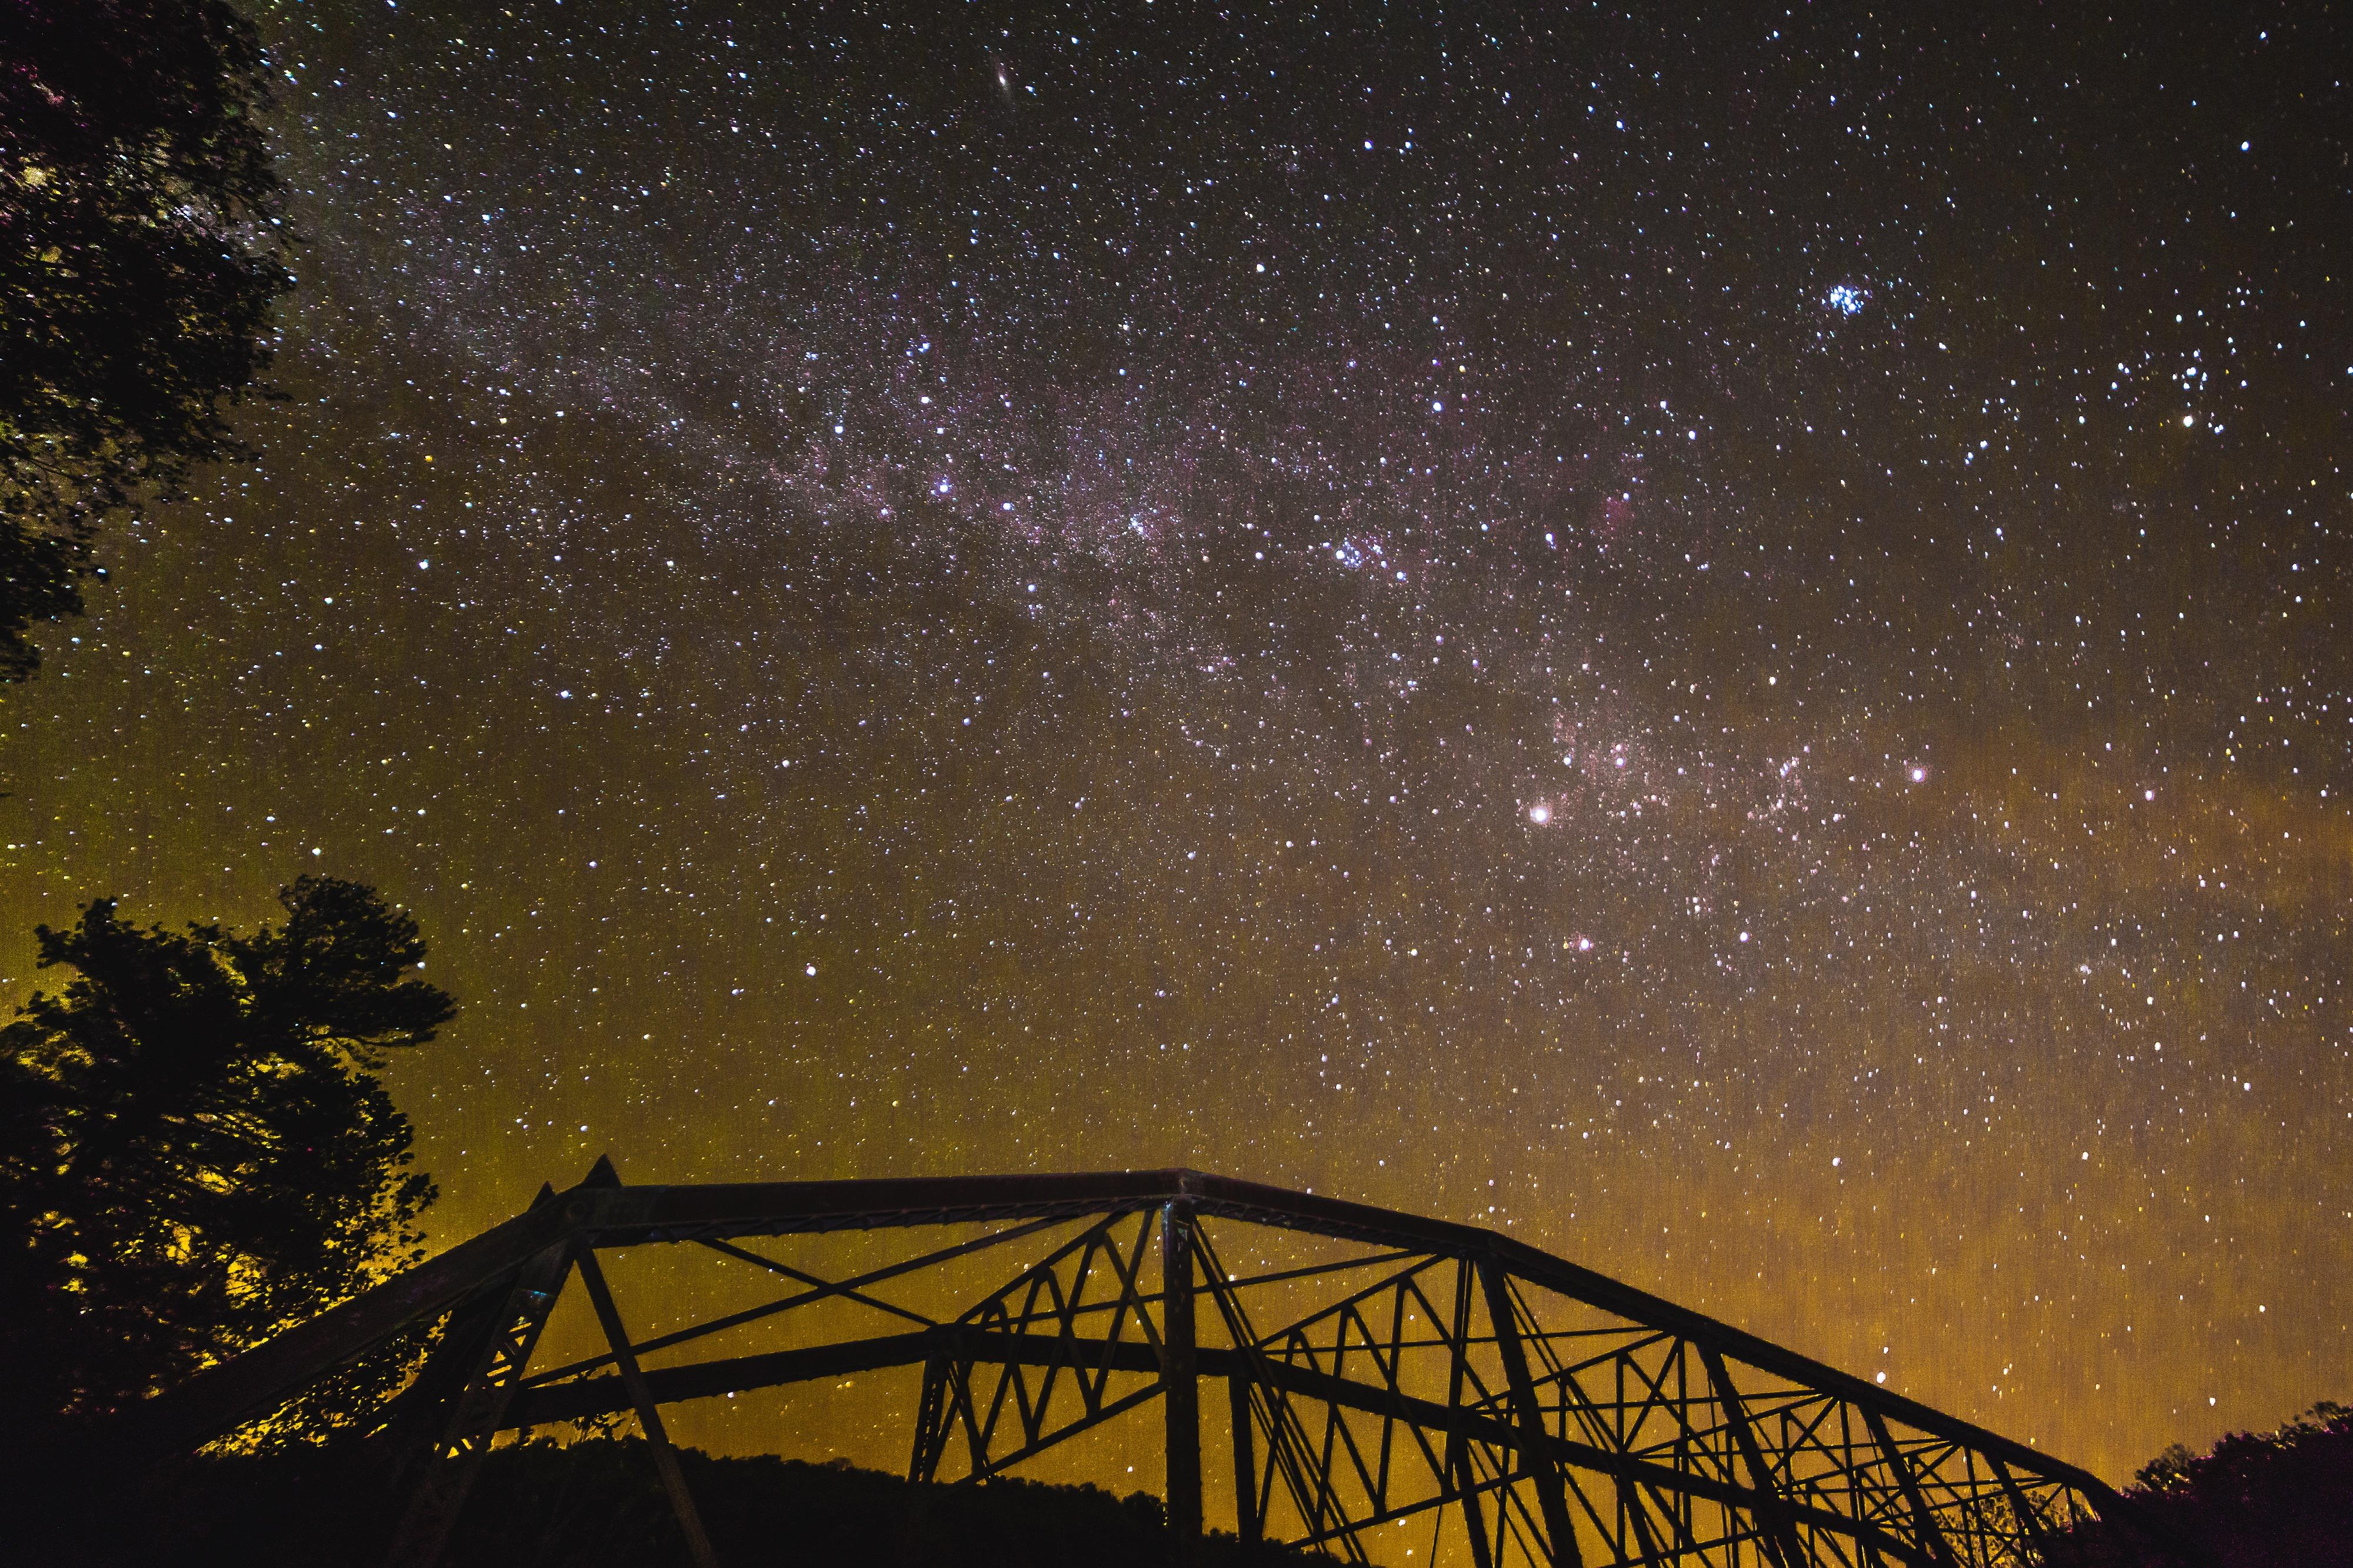 A star-filled night sky above the silhouette of a truss-bridge